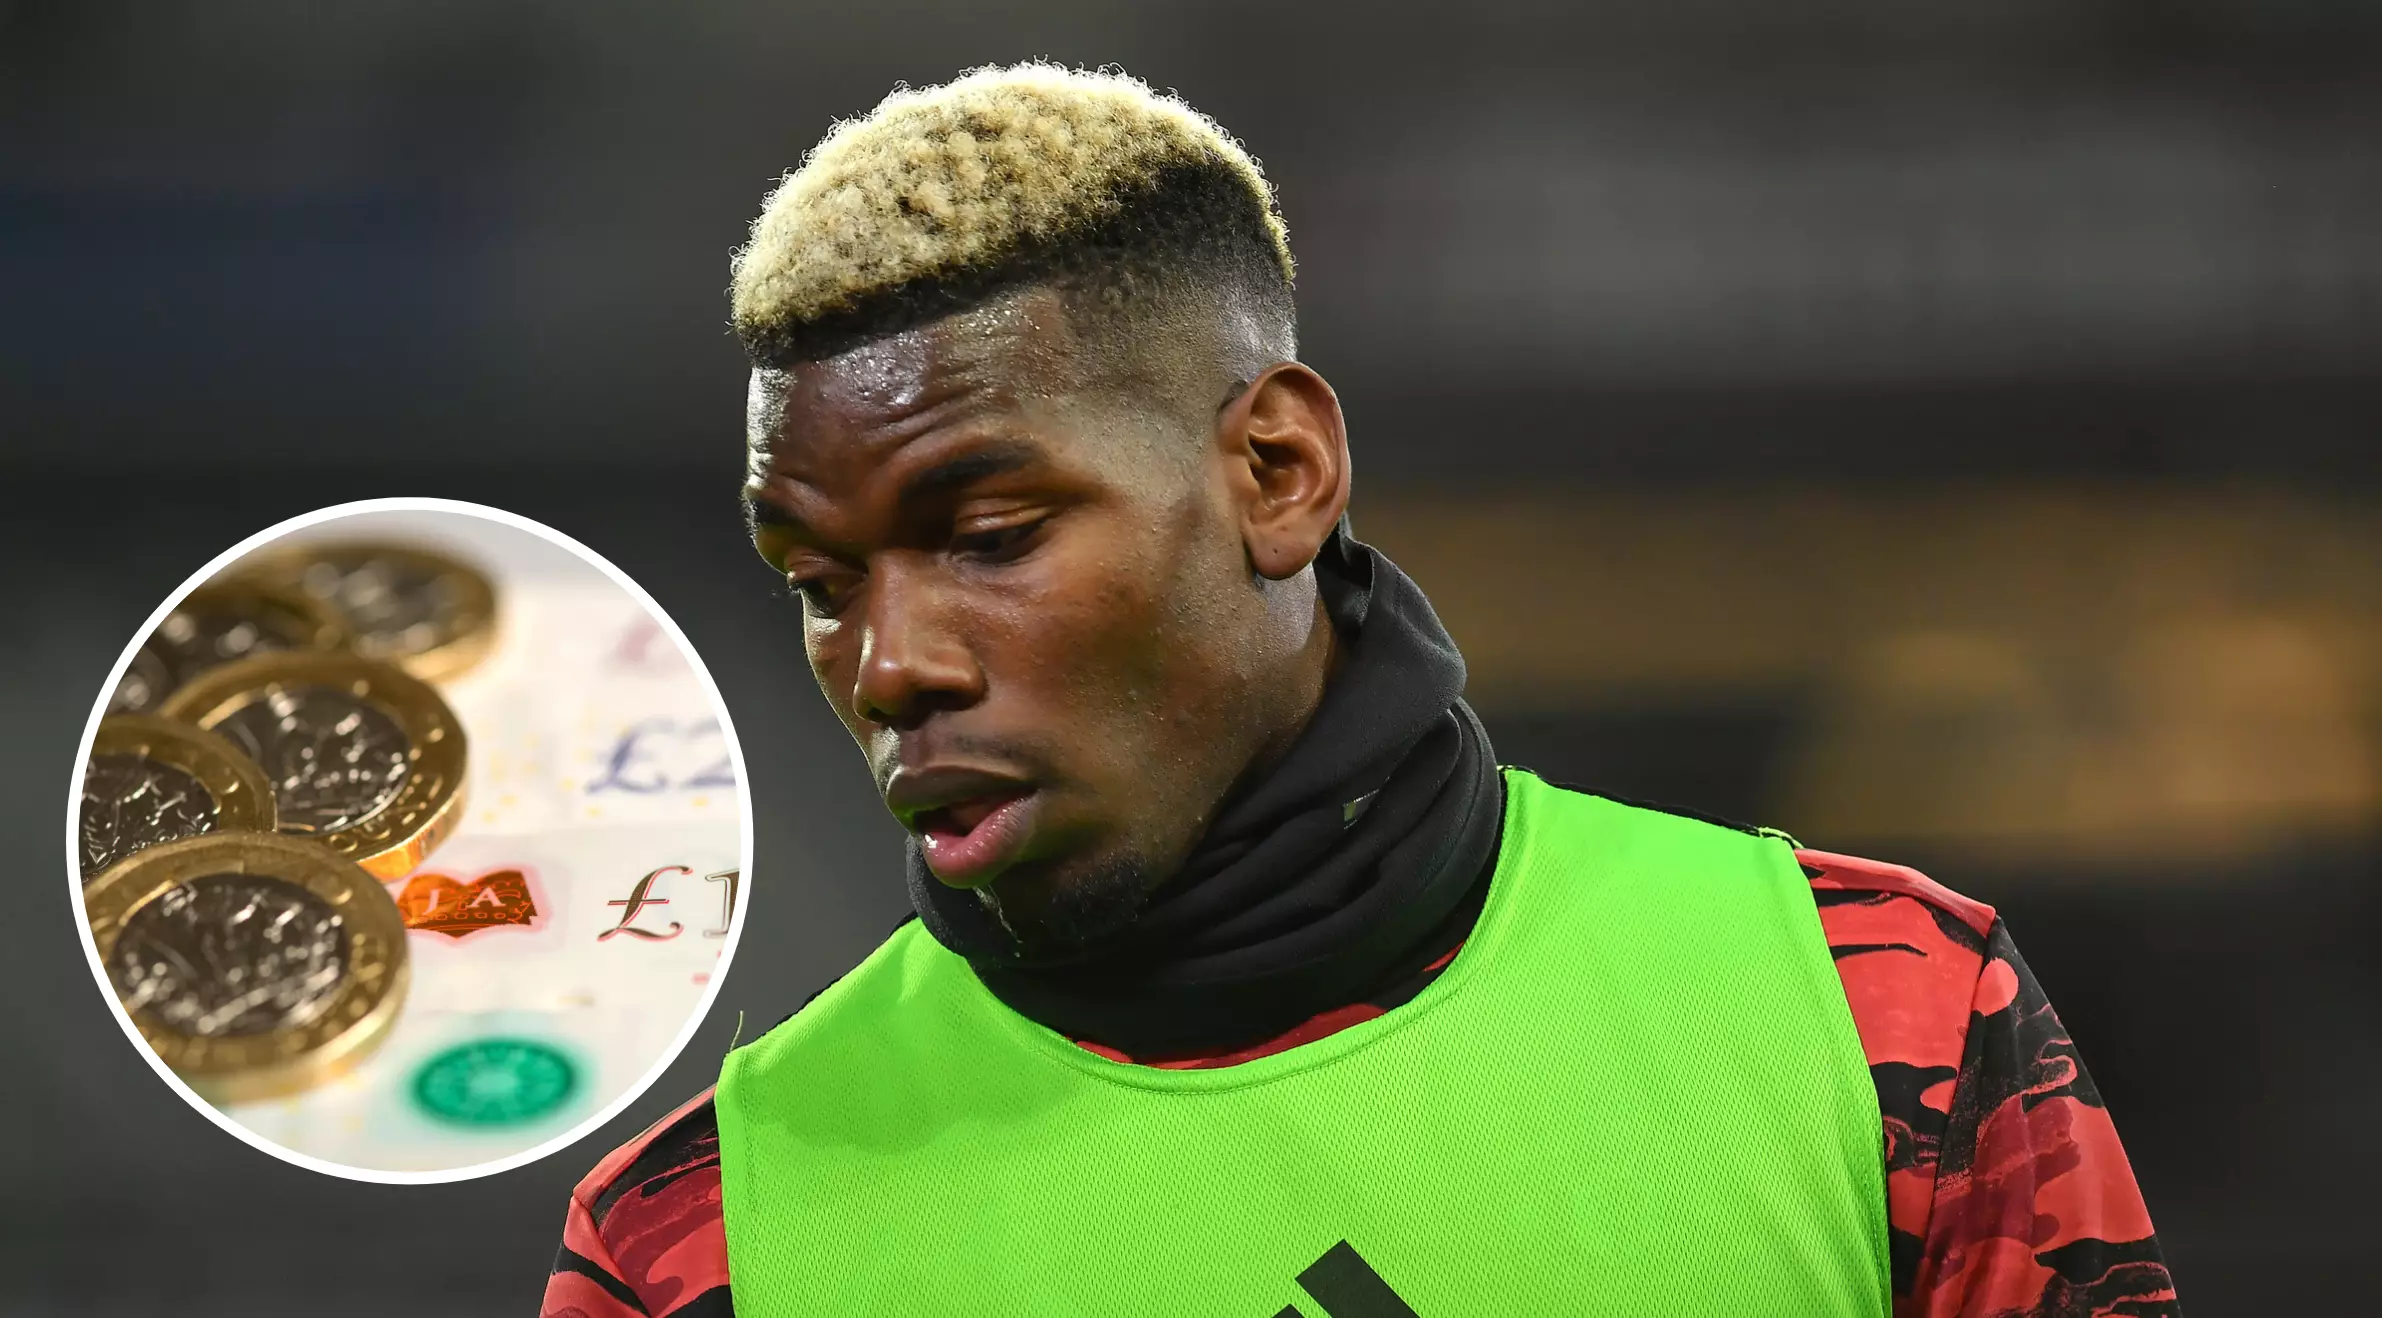 Manchester United Will Accept Bids From As Low As £50m To Offload Paul Pogba In The January Transfer Window